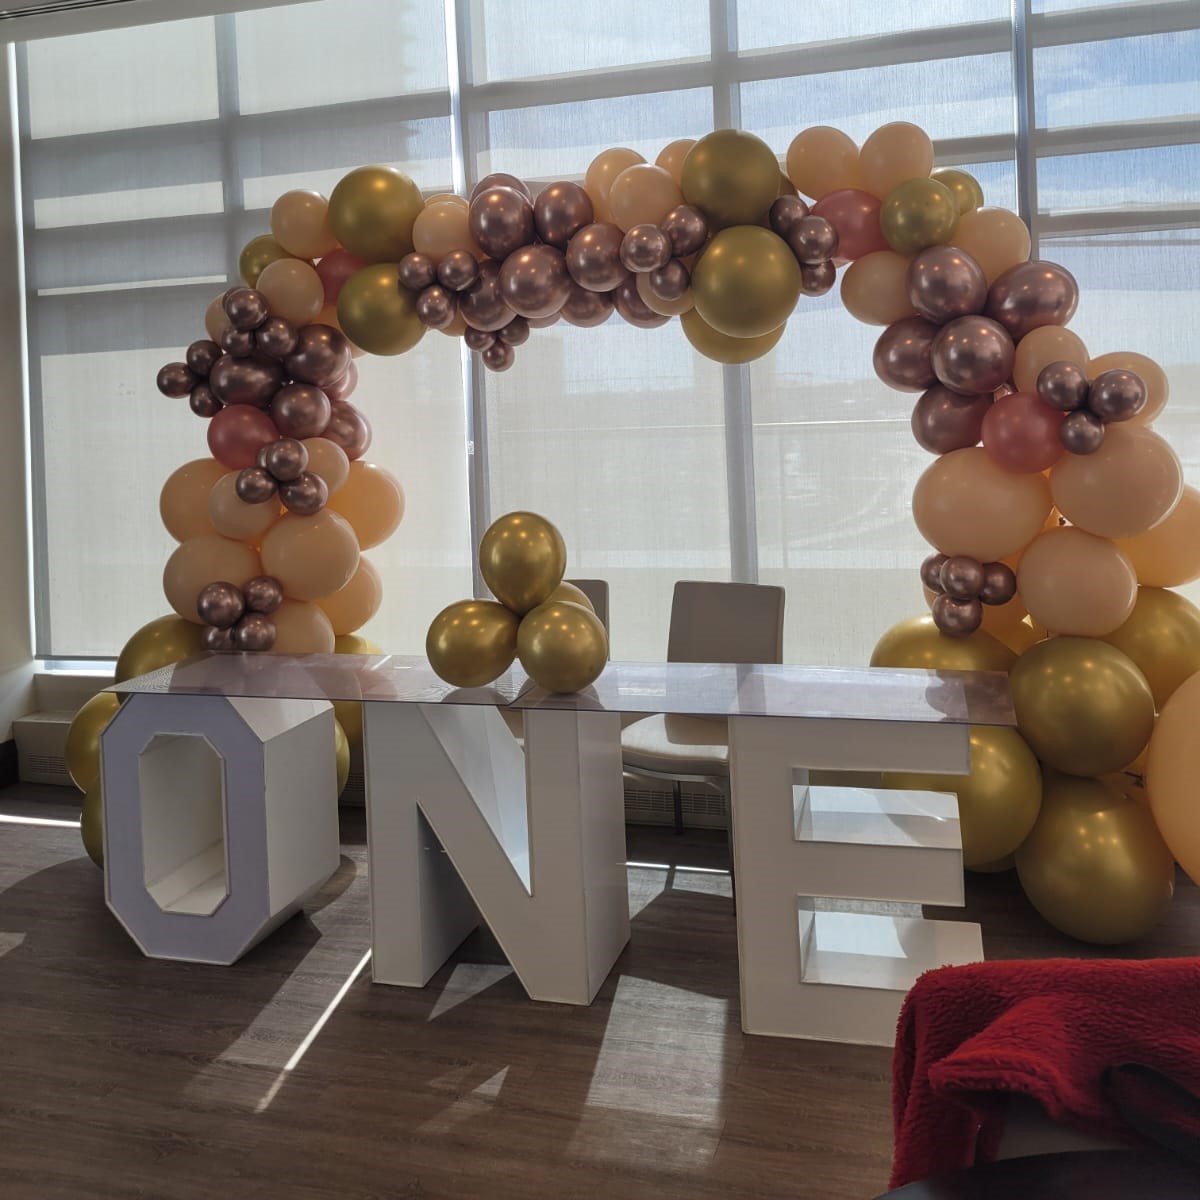 For the best decorations with balloon arrangements in Mississauga think of us